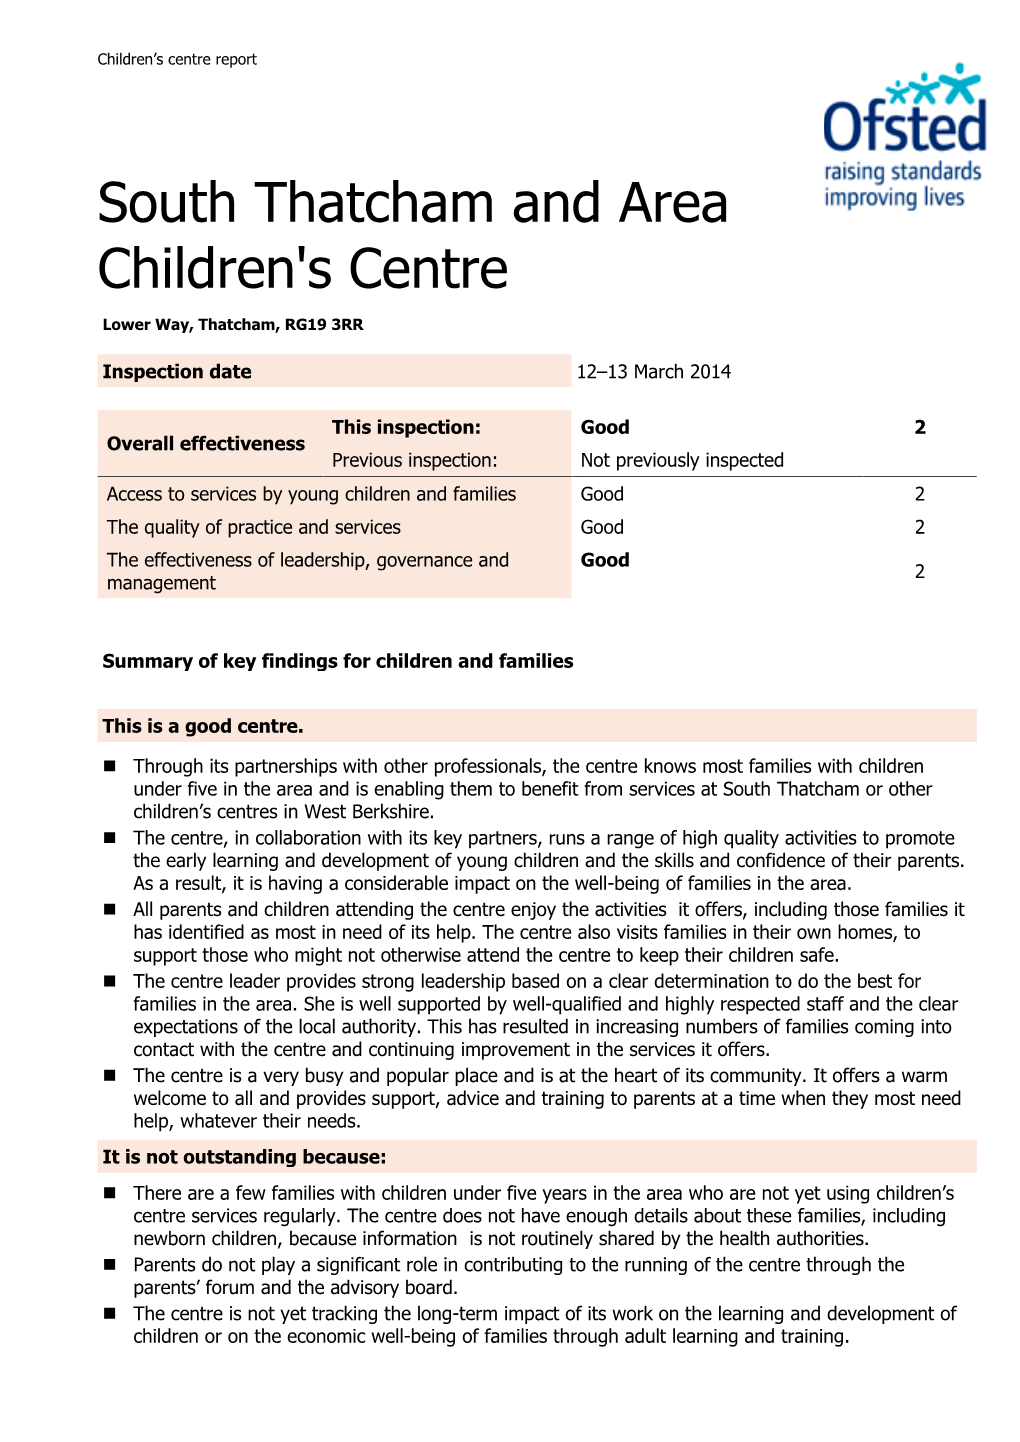 South Thatcham and Area Children's Centre